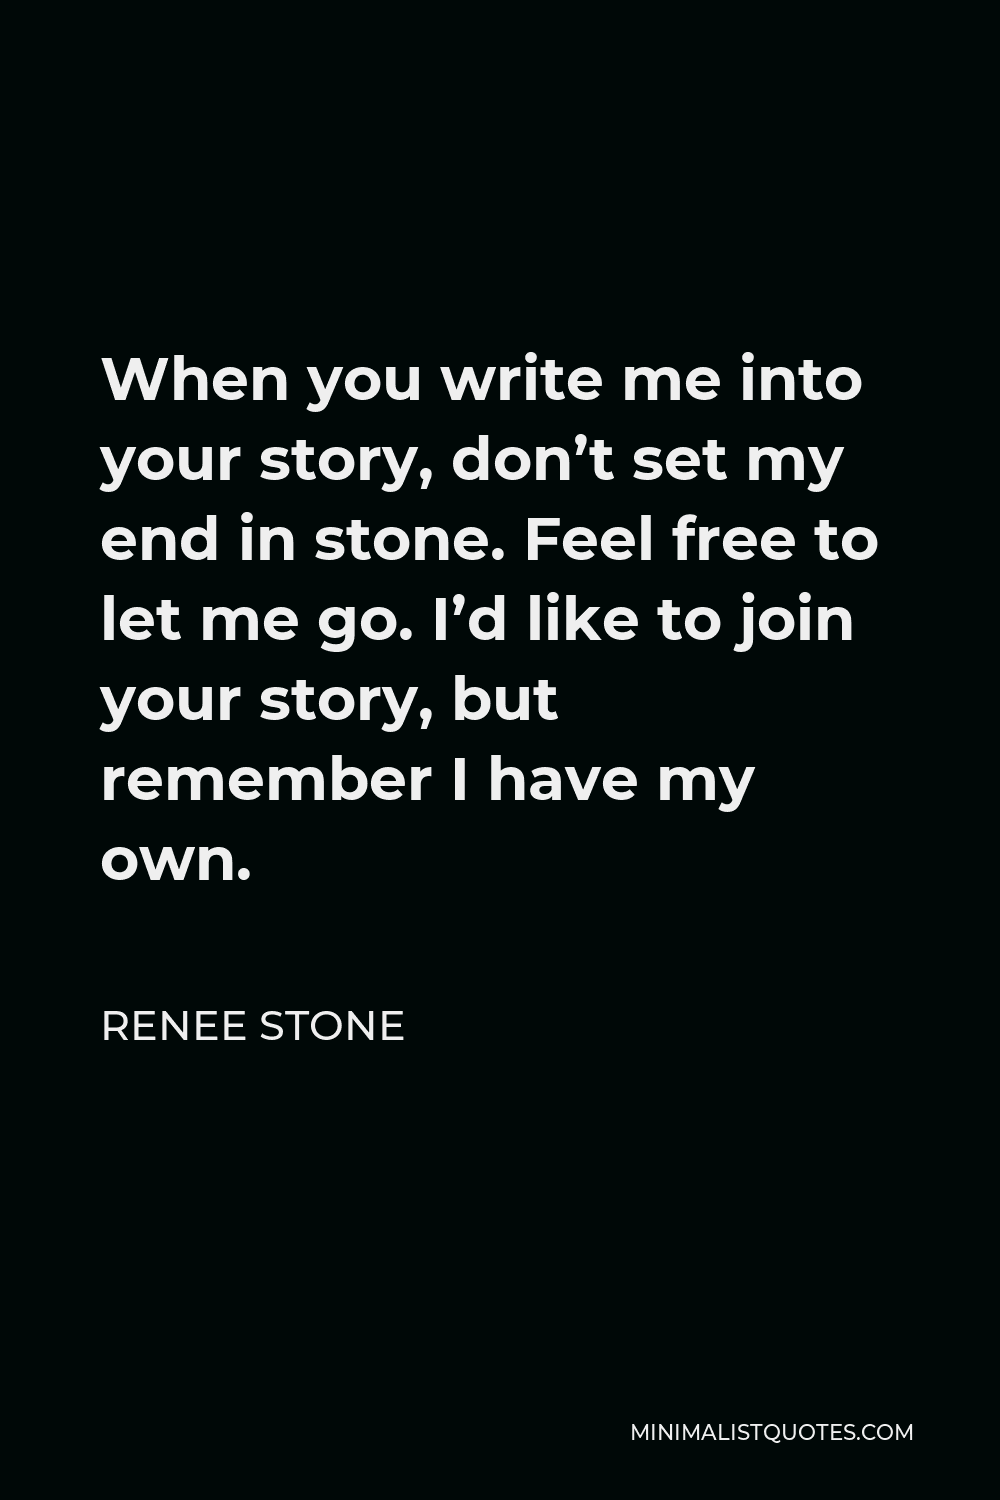 Renee Stone Quote - When you write me into your story, don’t set my end in stone. Feel free to let me go. I’d like to join your story, but remember I have my own.